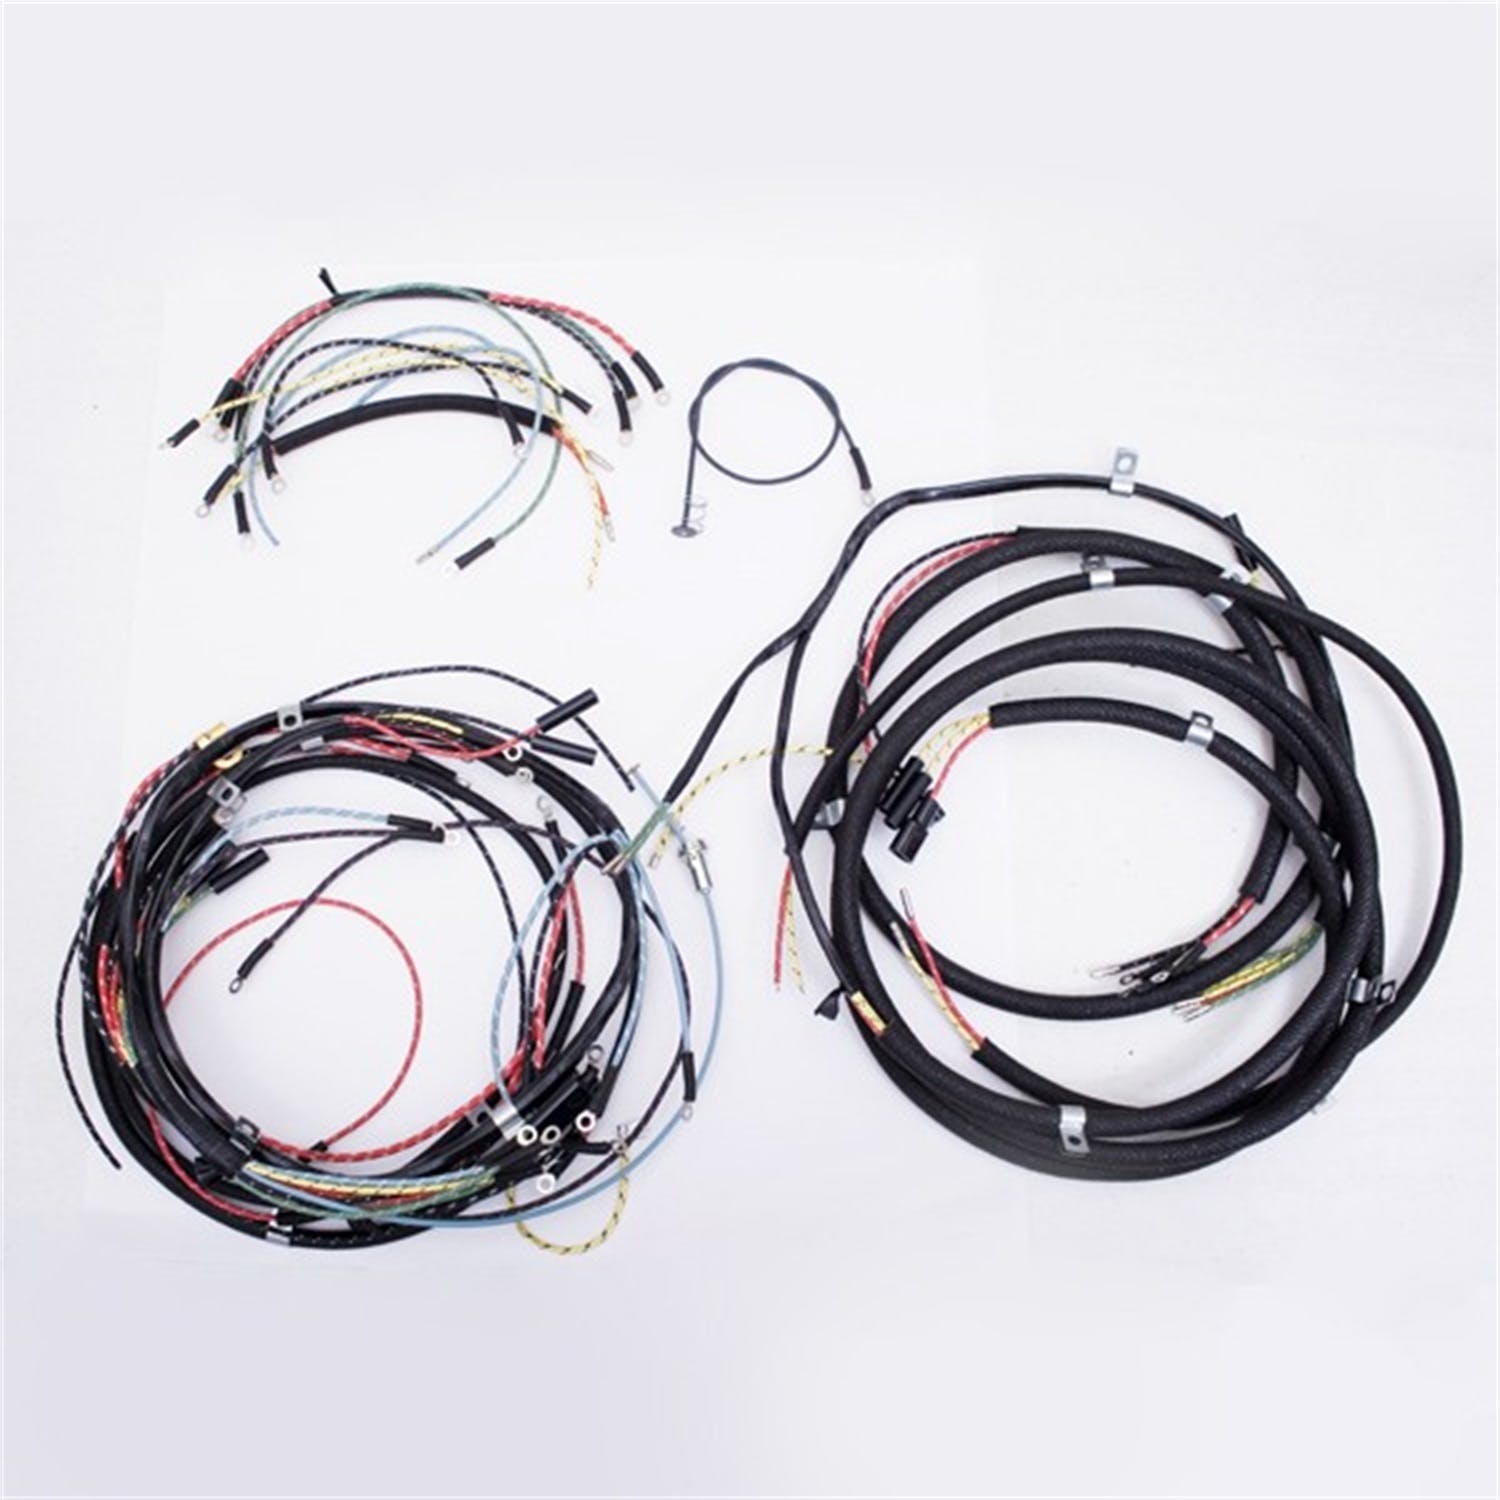 Omix-ADA 17201.04 Complete Wiring Harness with Turn Signal